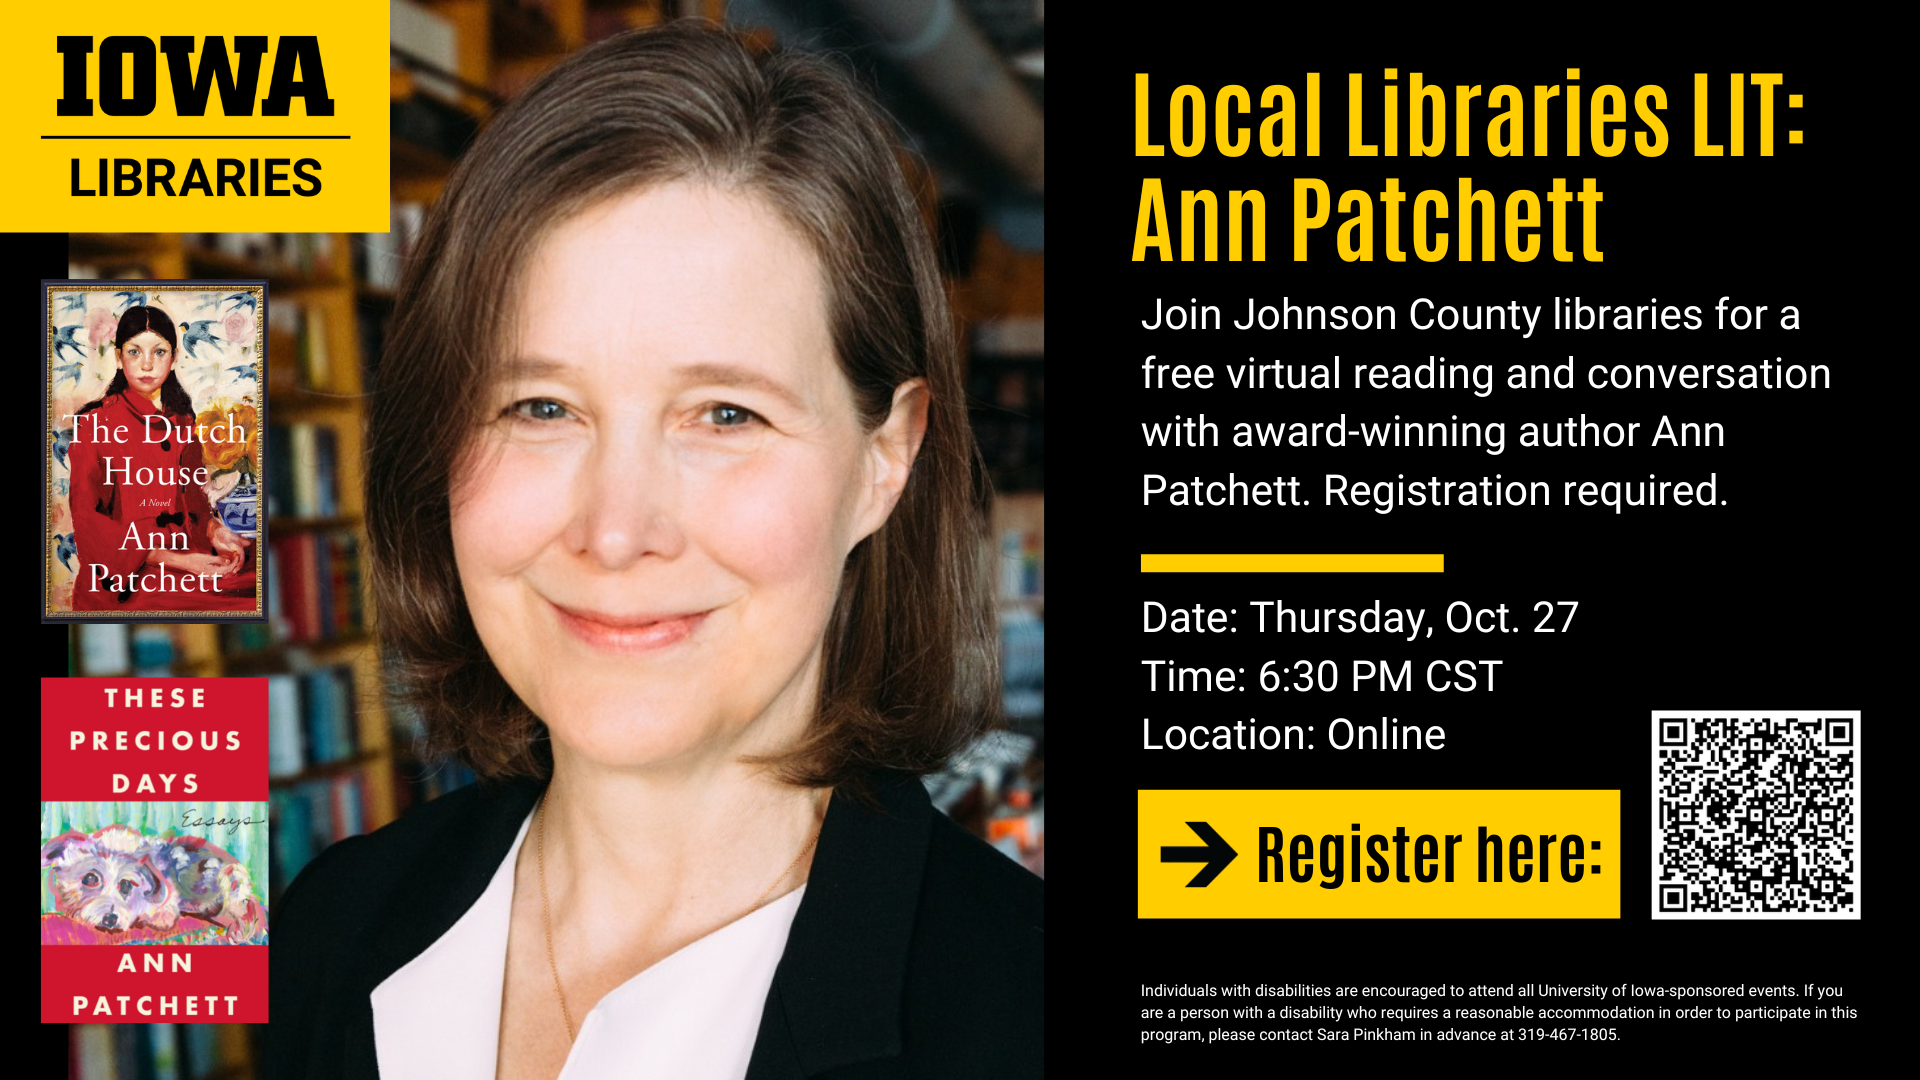 Local Libraries LIT: Ann Patchett. Join Johnson County libraries for a free virtual reading and conversation with award-winning author Ann Patchett. Registration required. Thursday, October 27 at 6:30 PM CST online. Register with the Iowa City Public Library.